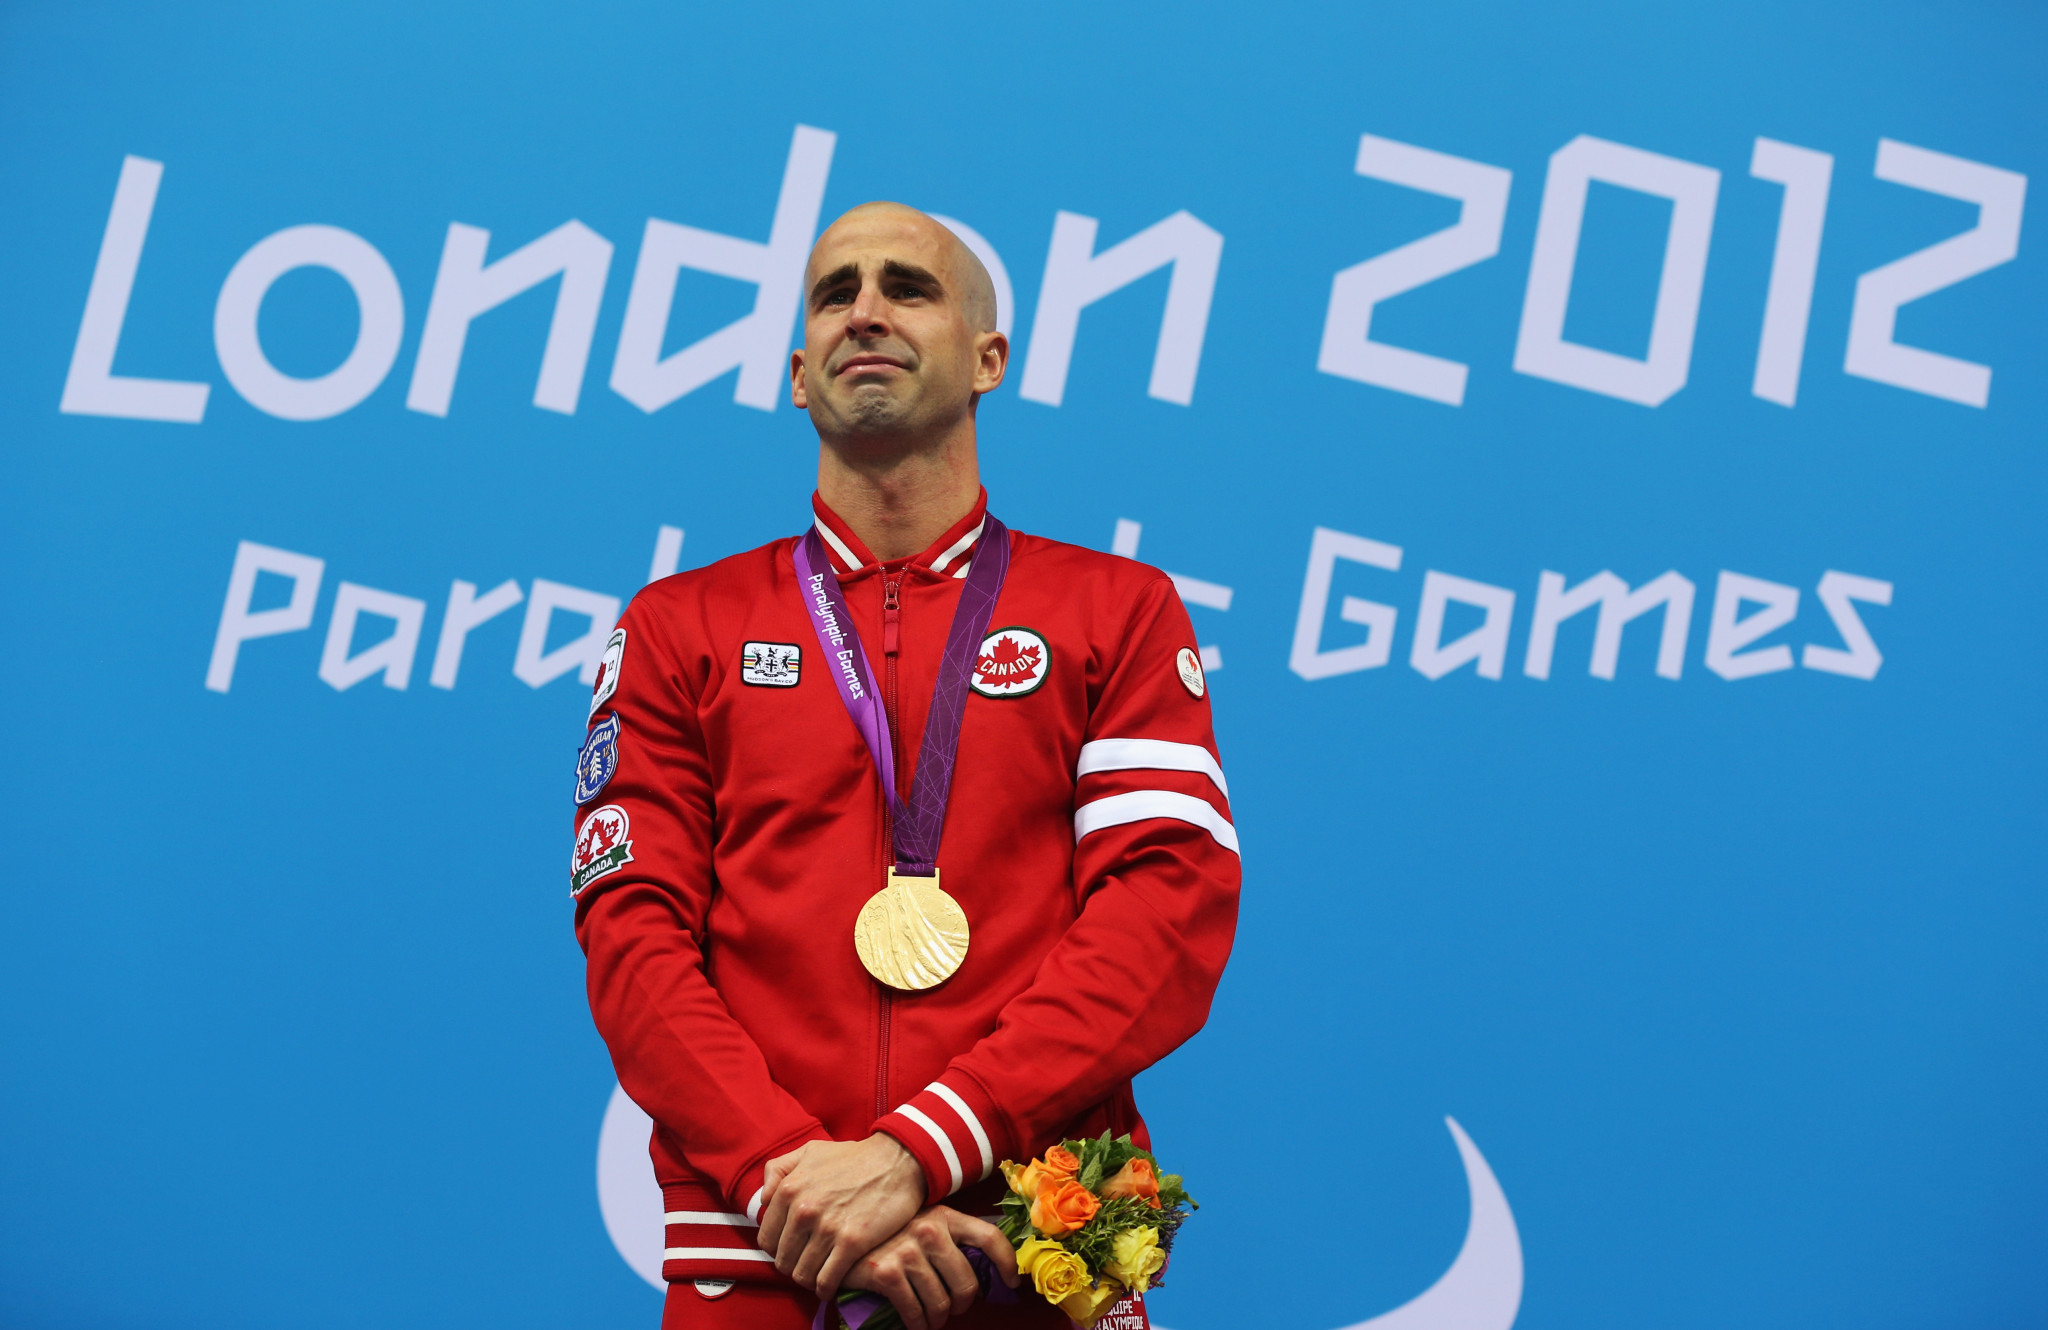 Canada's Benoit Huot won a gold medal at the London 2012 Paralympic Games, as well as three at Sydney 2000 and five at Athens 2004 during a career which also set him set 60 world records ©Getty Images